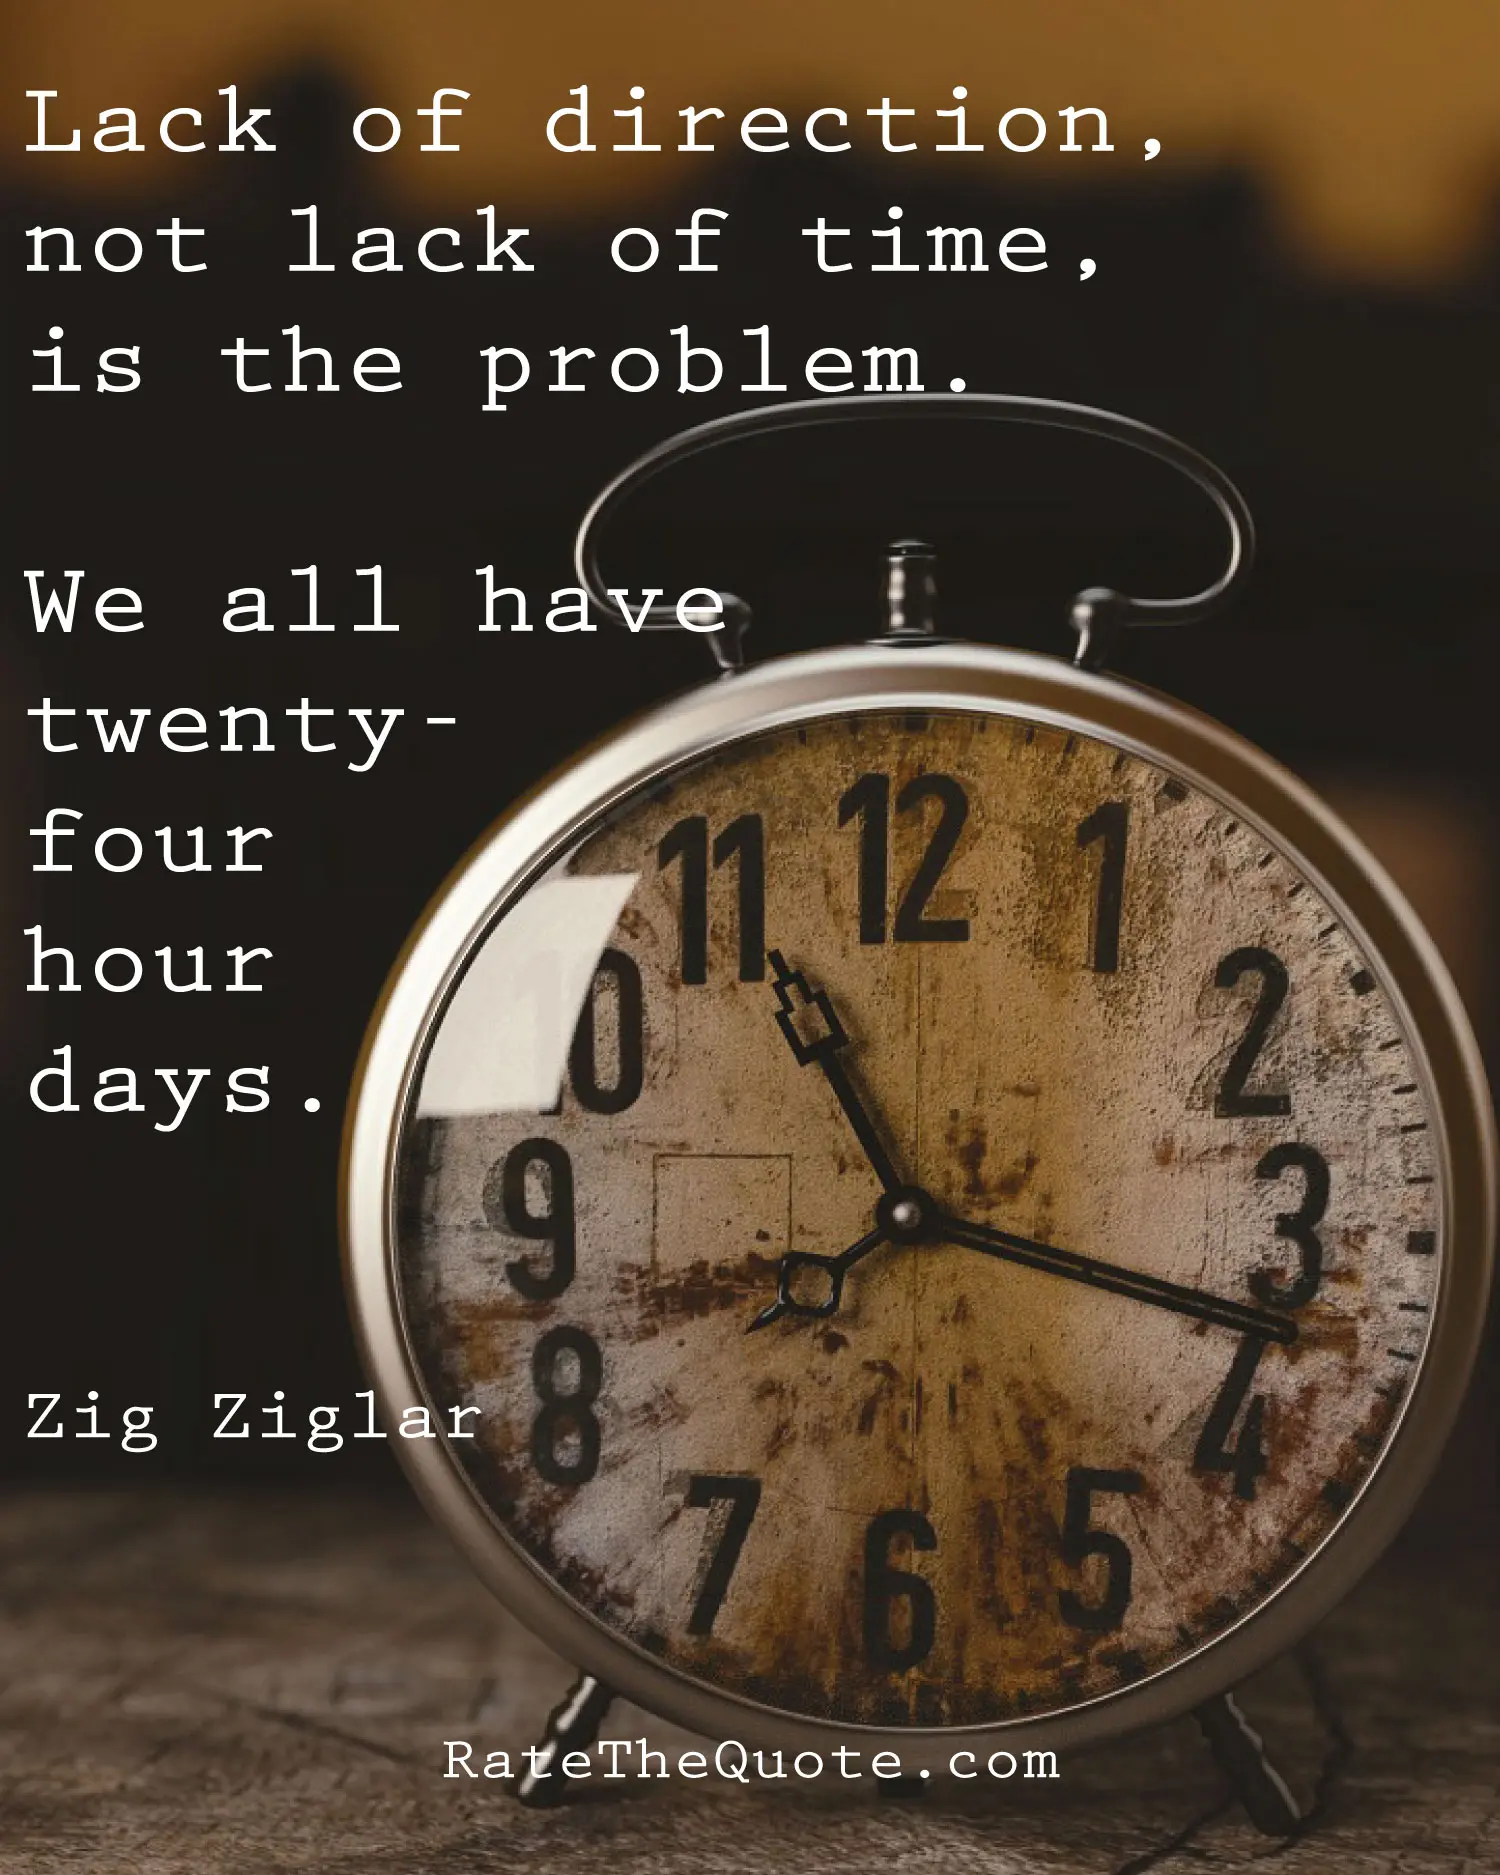 Lack of direction, not lack of time, is the problem. We all have twenty-four hour days. Zig Ziglar